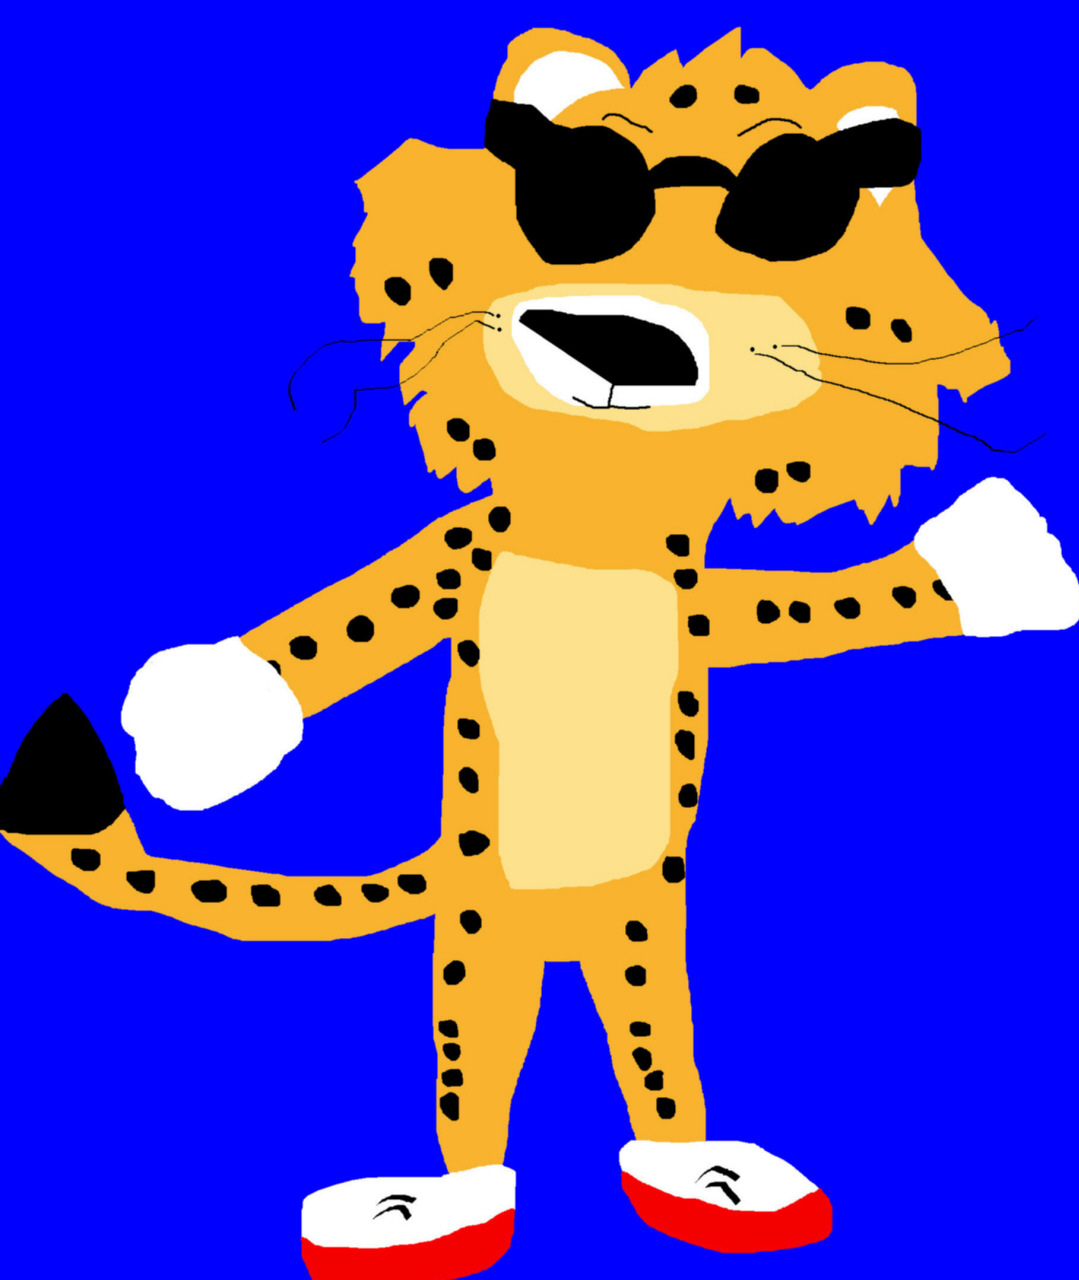 Chester Cheetah MS Paint New For 2015 Again^^ by Falconlobo